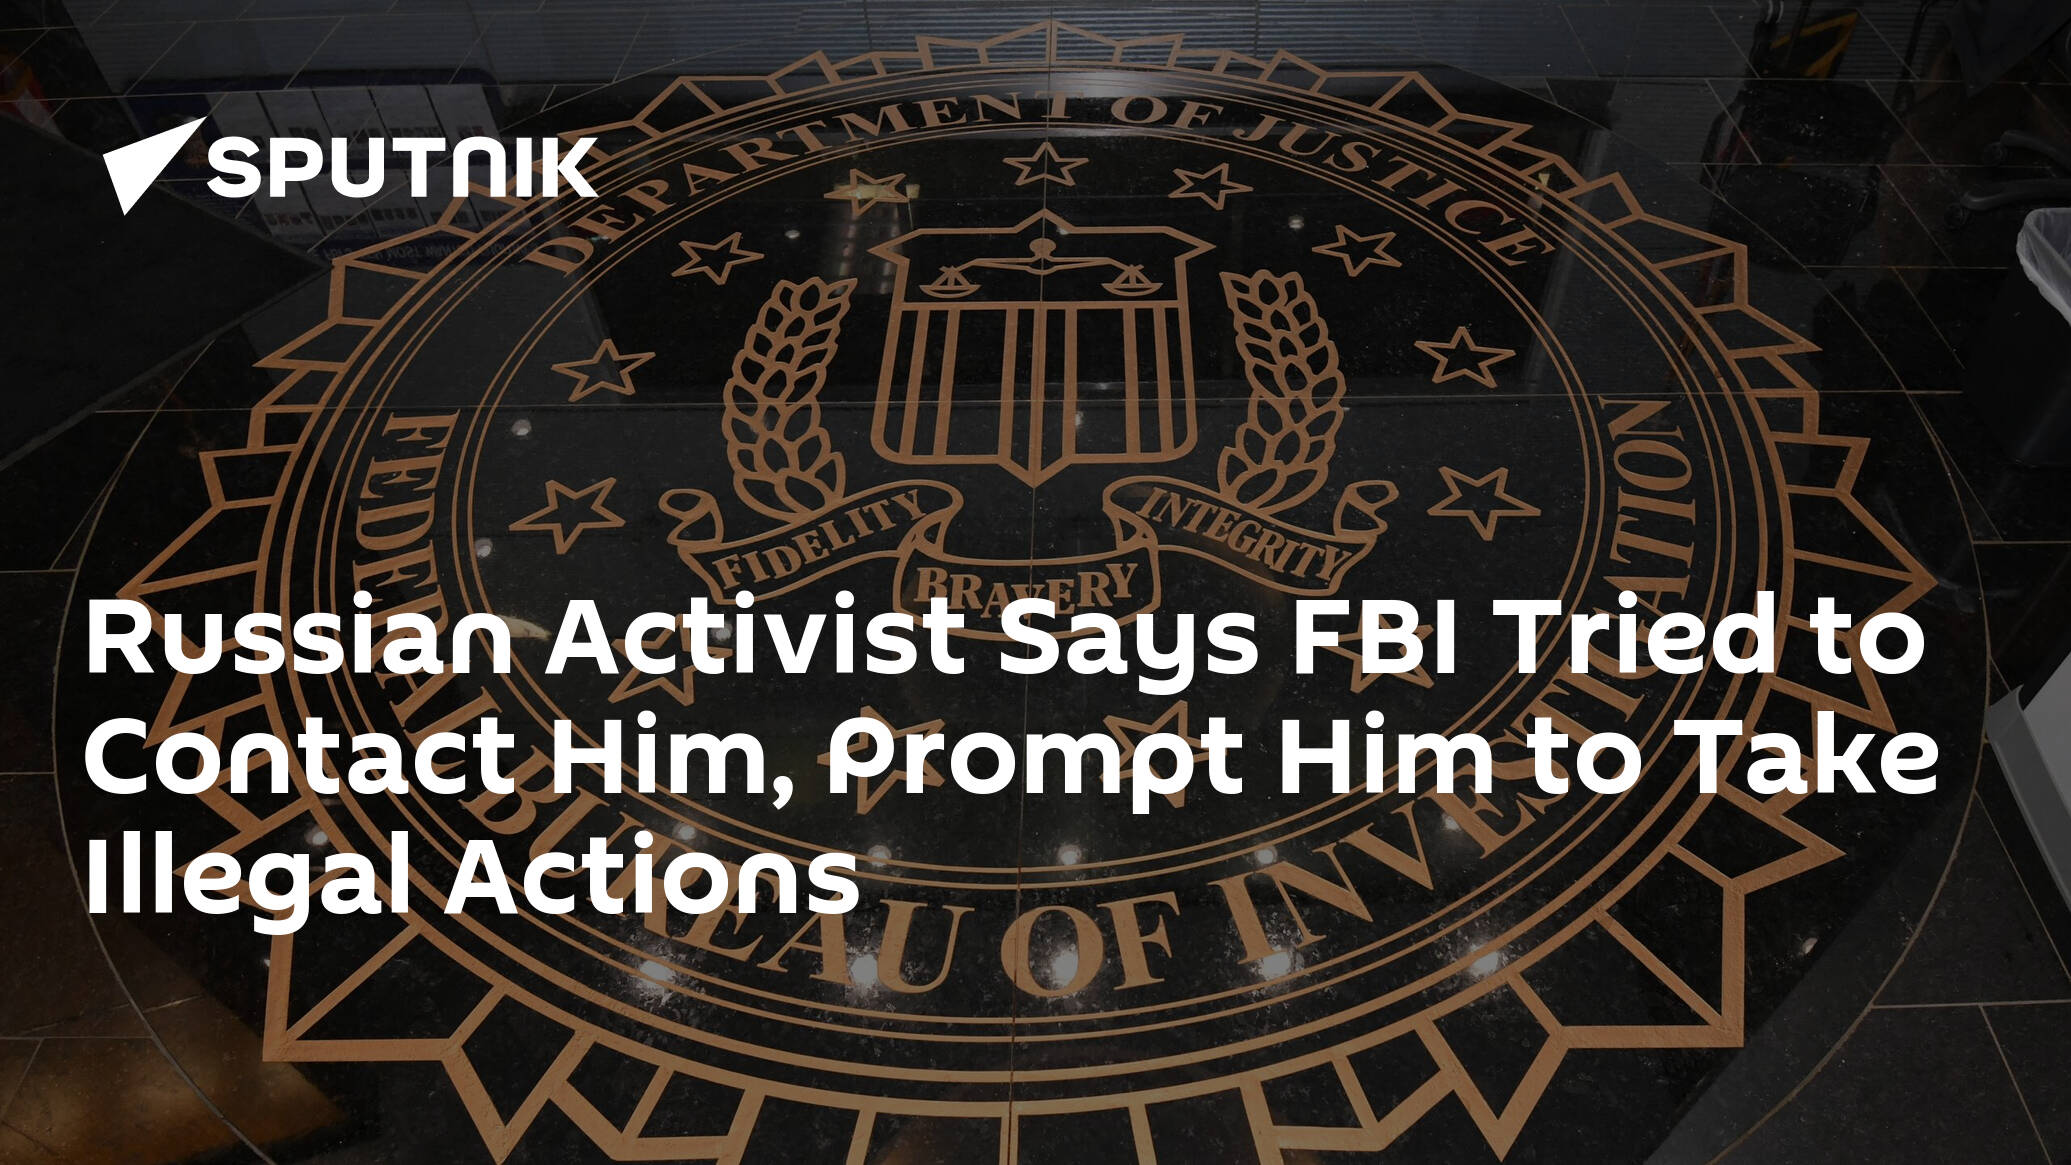 Russian Activist Says FBI Tried to Contact Him, Prompt Him to Take Illegal Actions